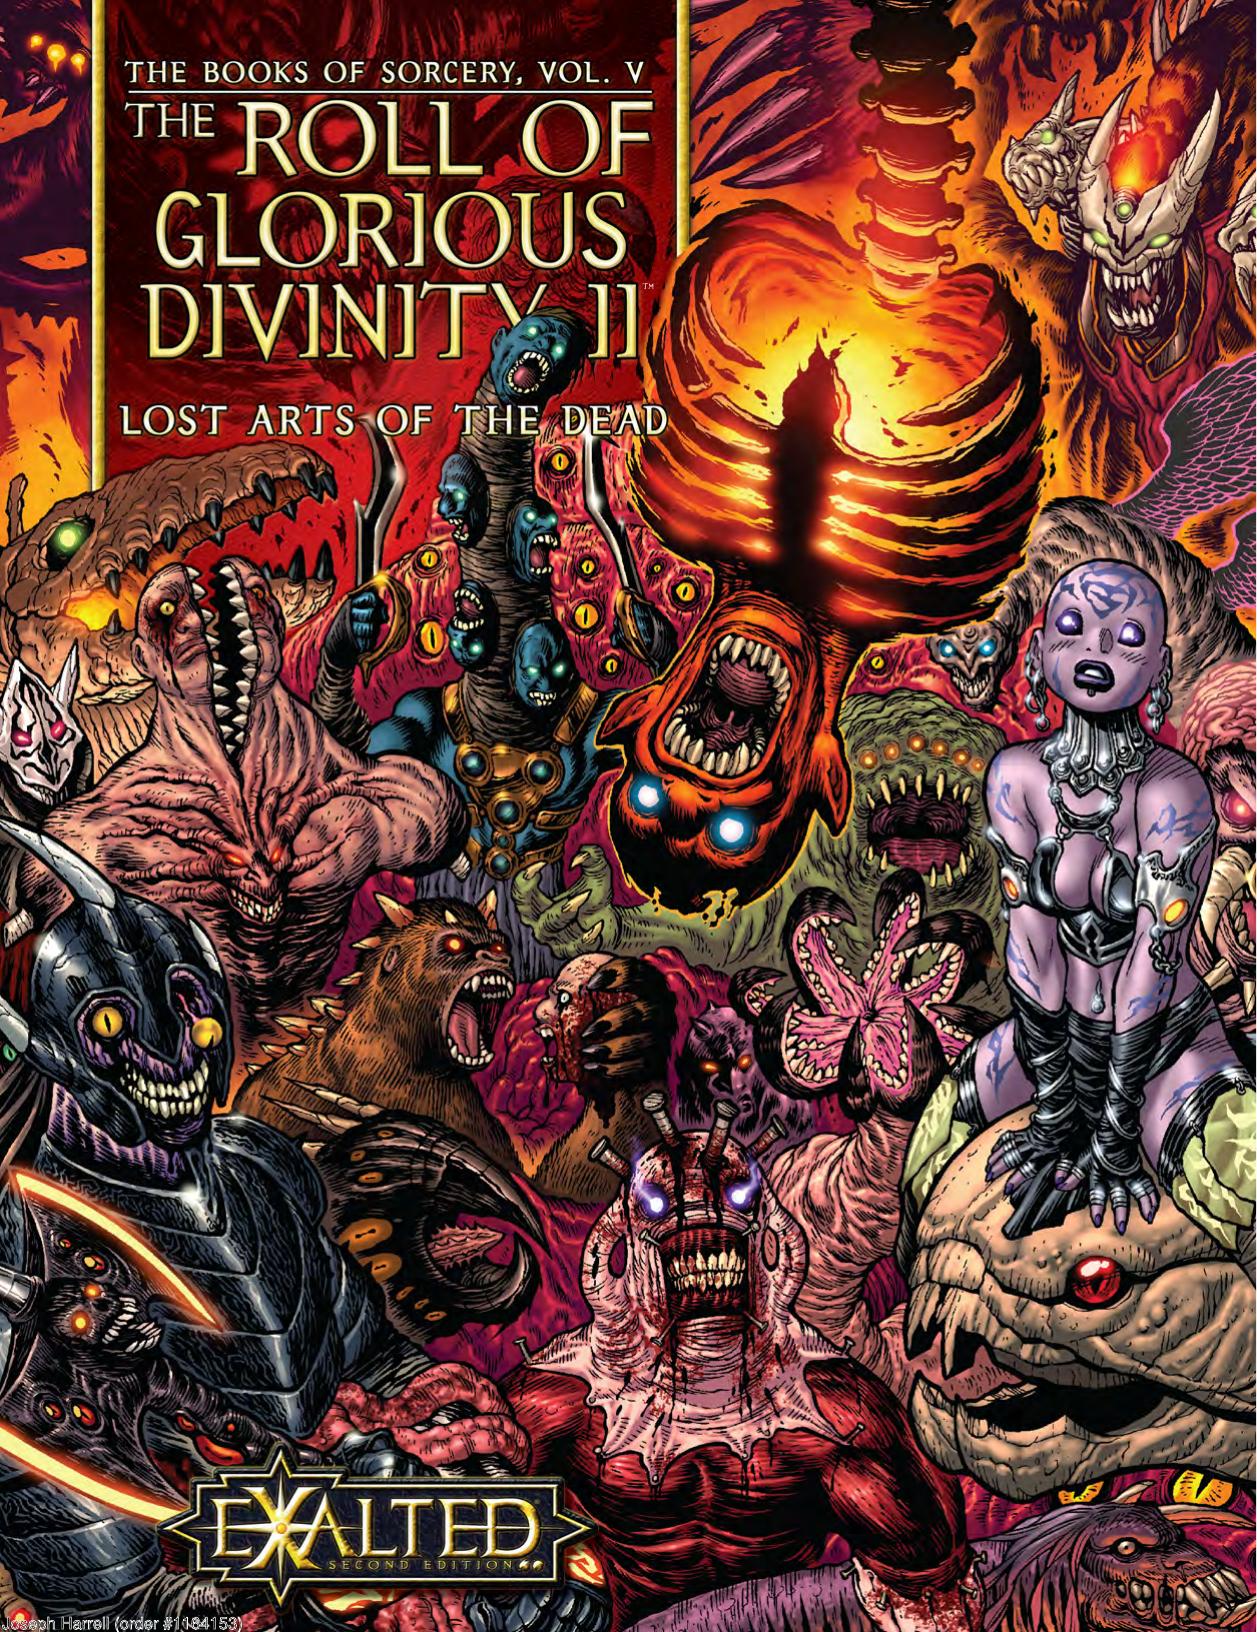 Roll Of Glorious Divinity II Lost Arts of the Dead